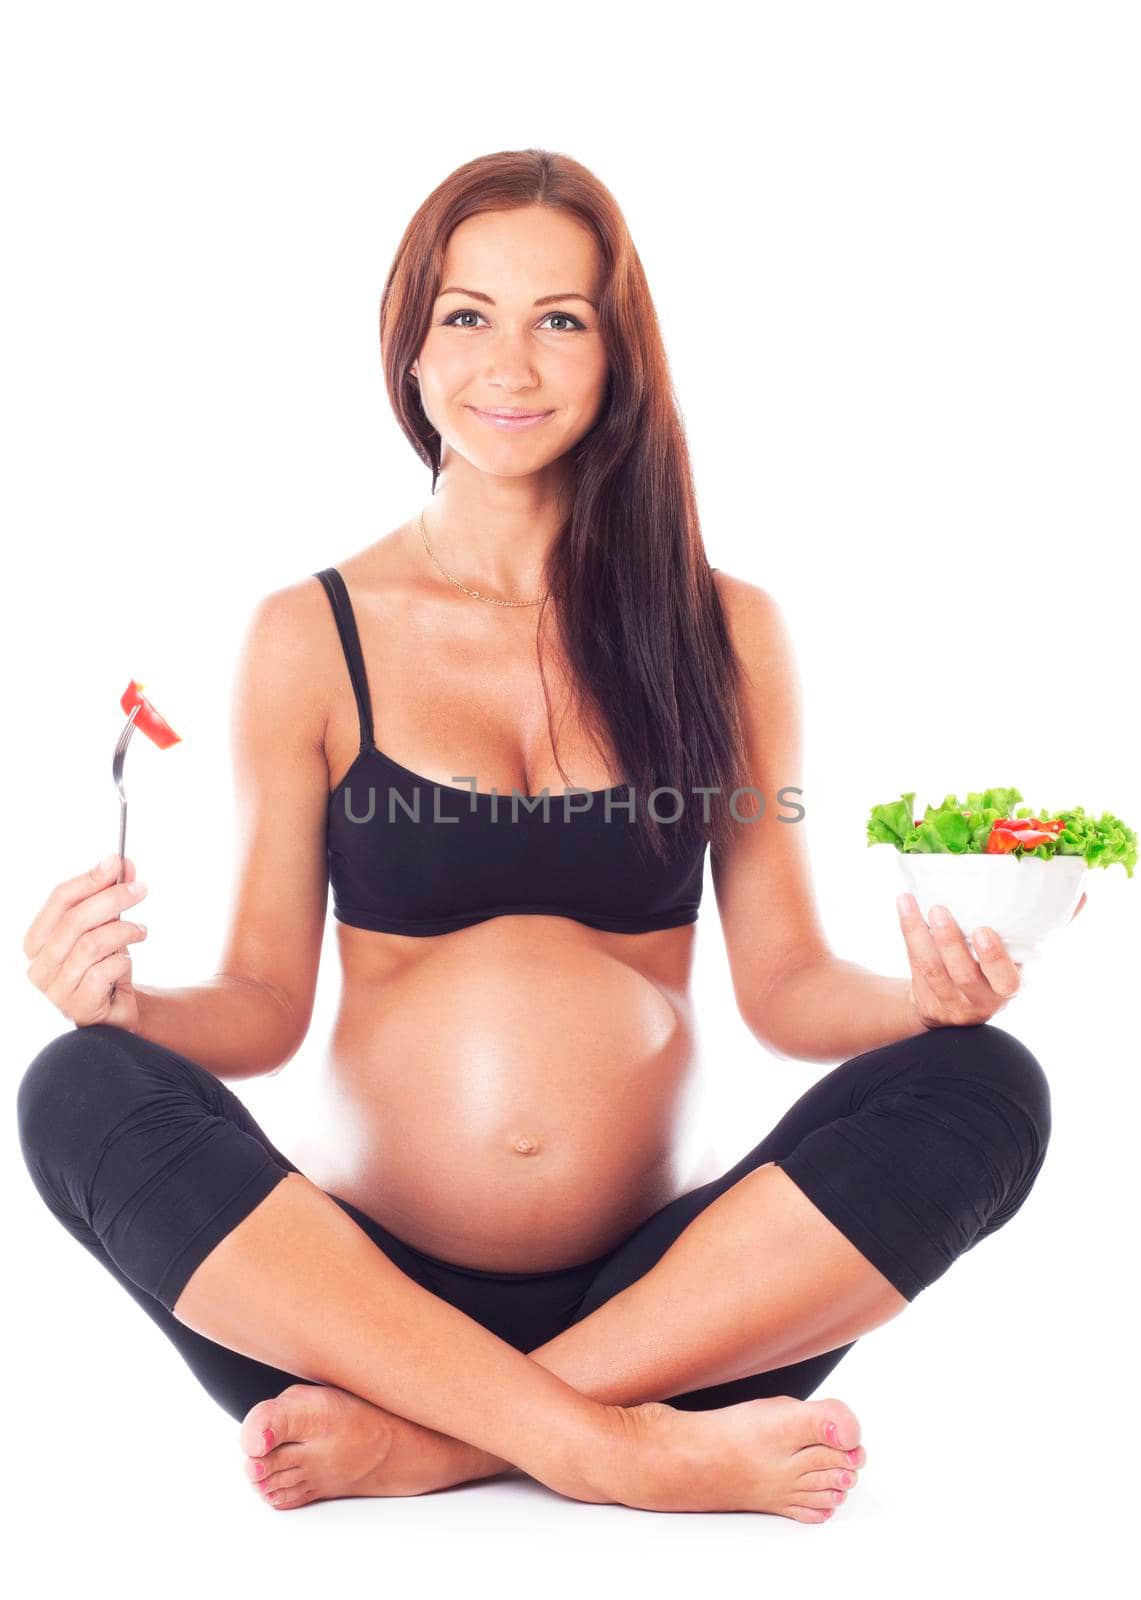 Pregnant woman sitting cross-legged and eating chopped salad, isolated on white.